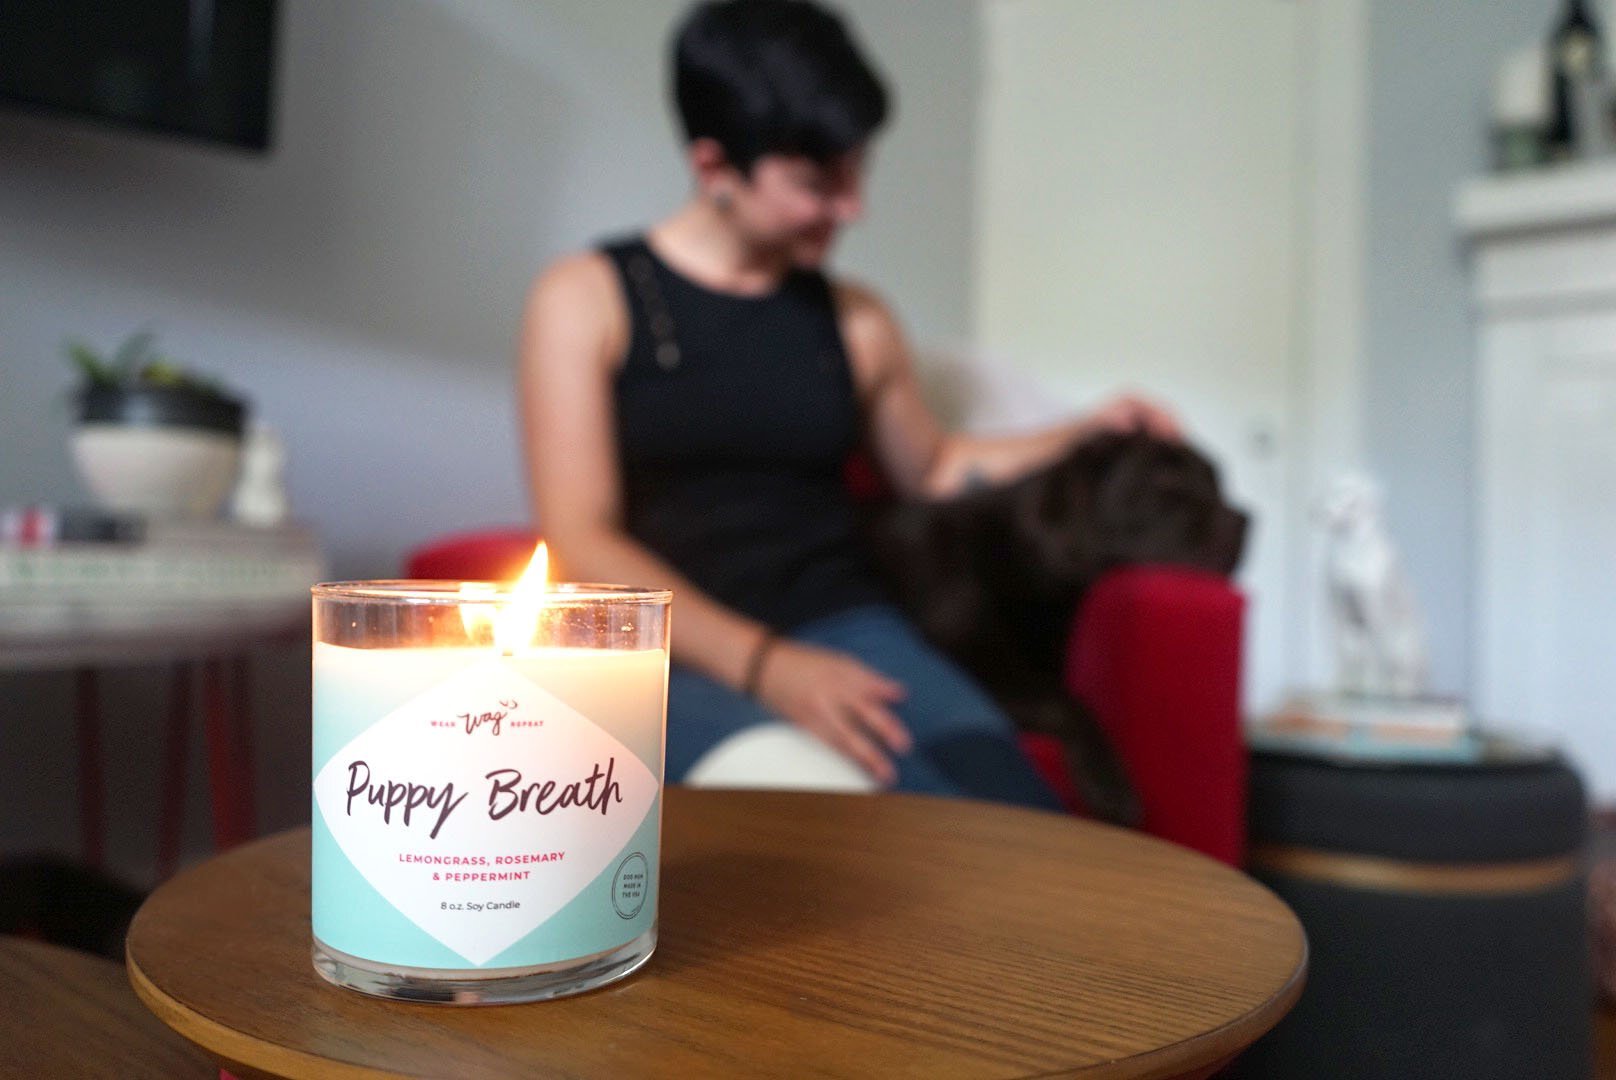 Puppy_Breath_Candle_at_Home_1024x1024@2x.jpg